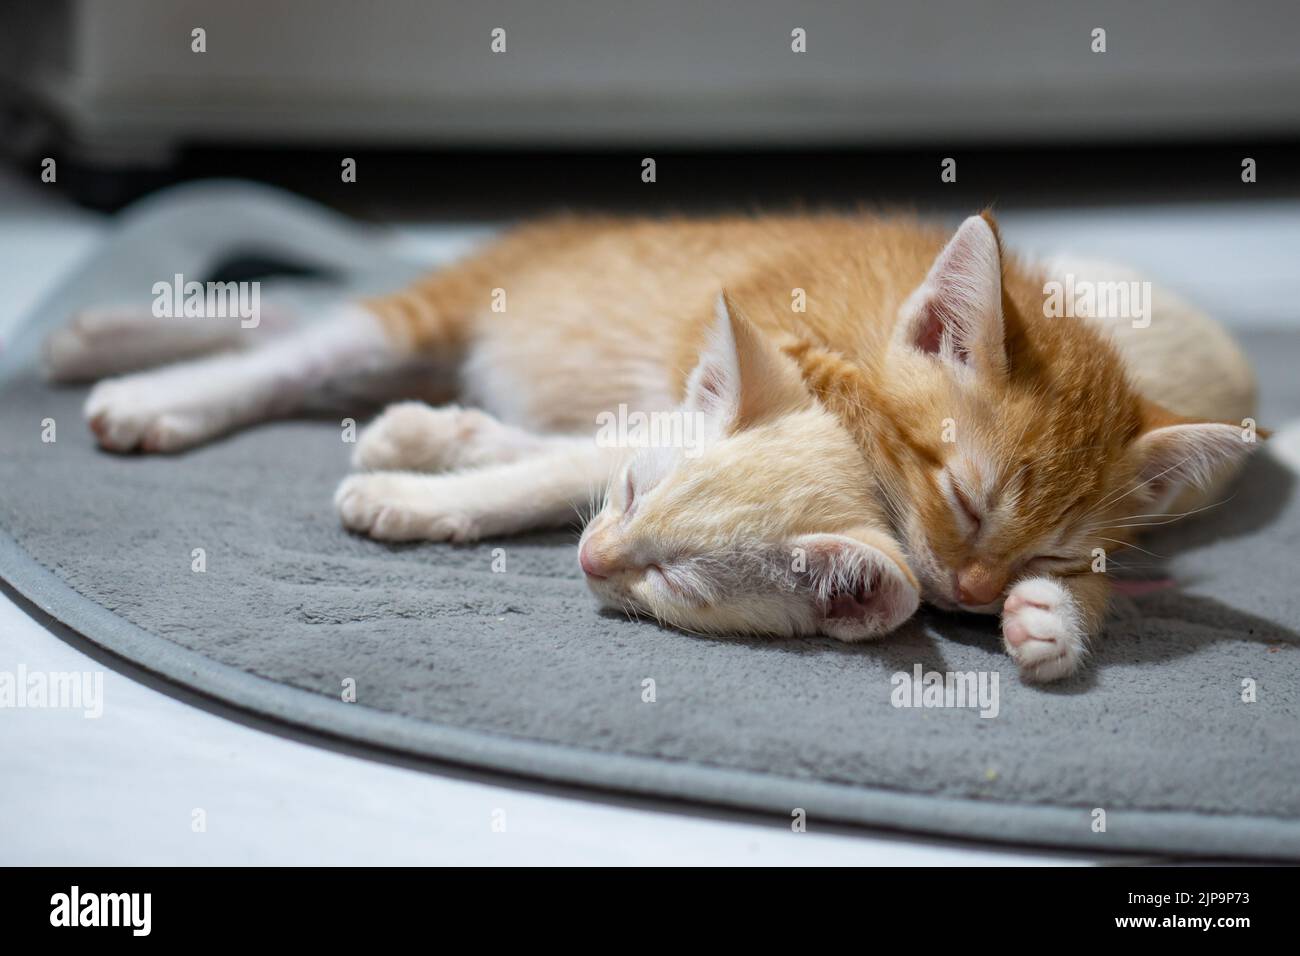 Orange and white thai kitten, 4 month old, sleeping in the house. Stock Photo